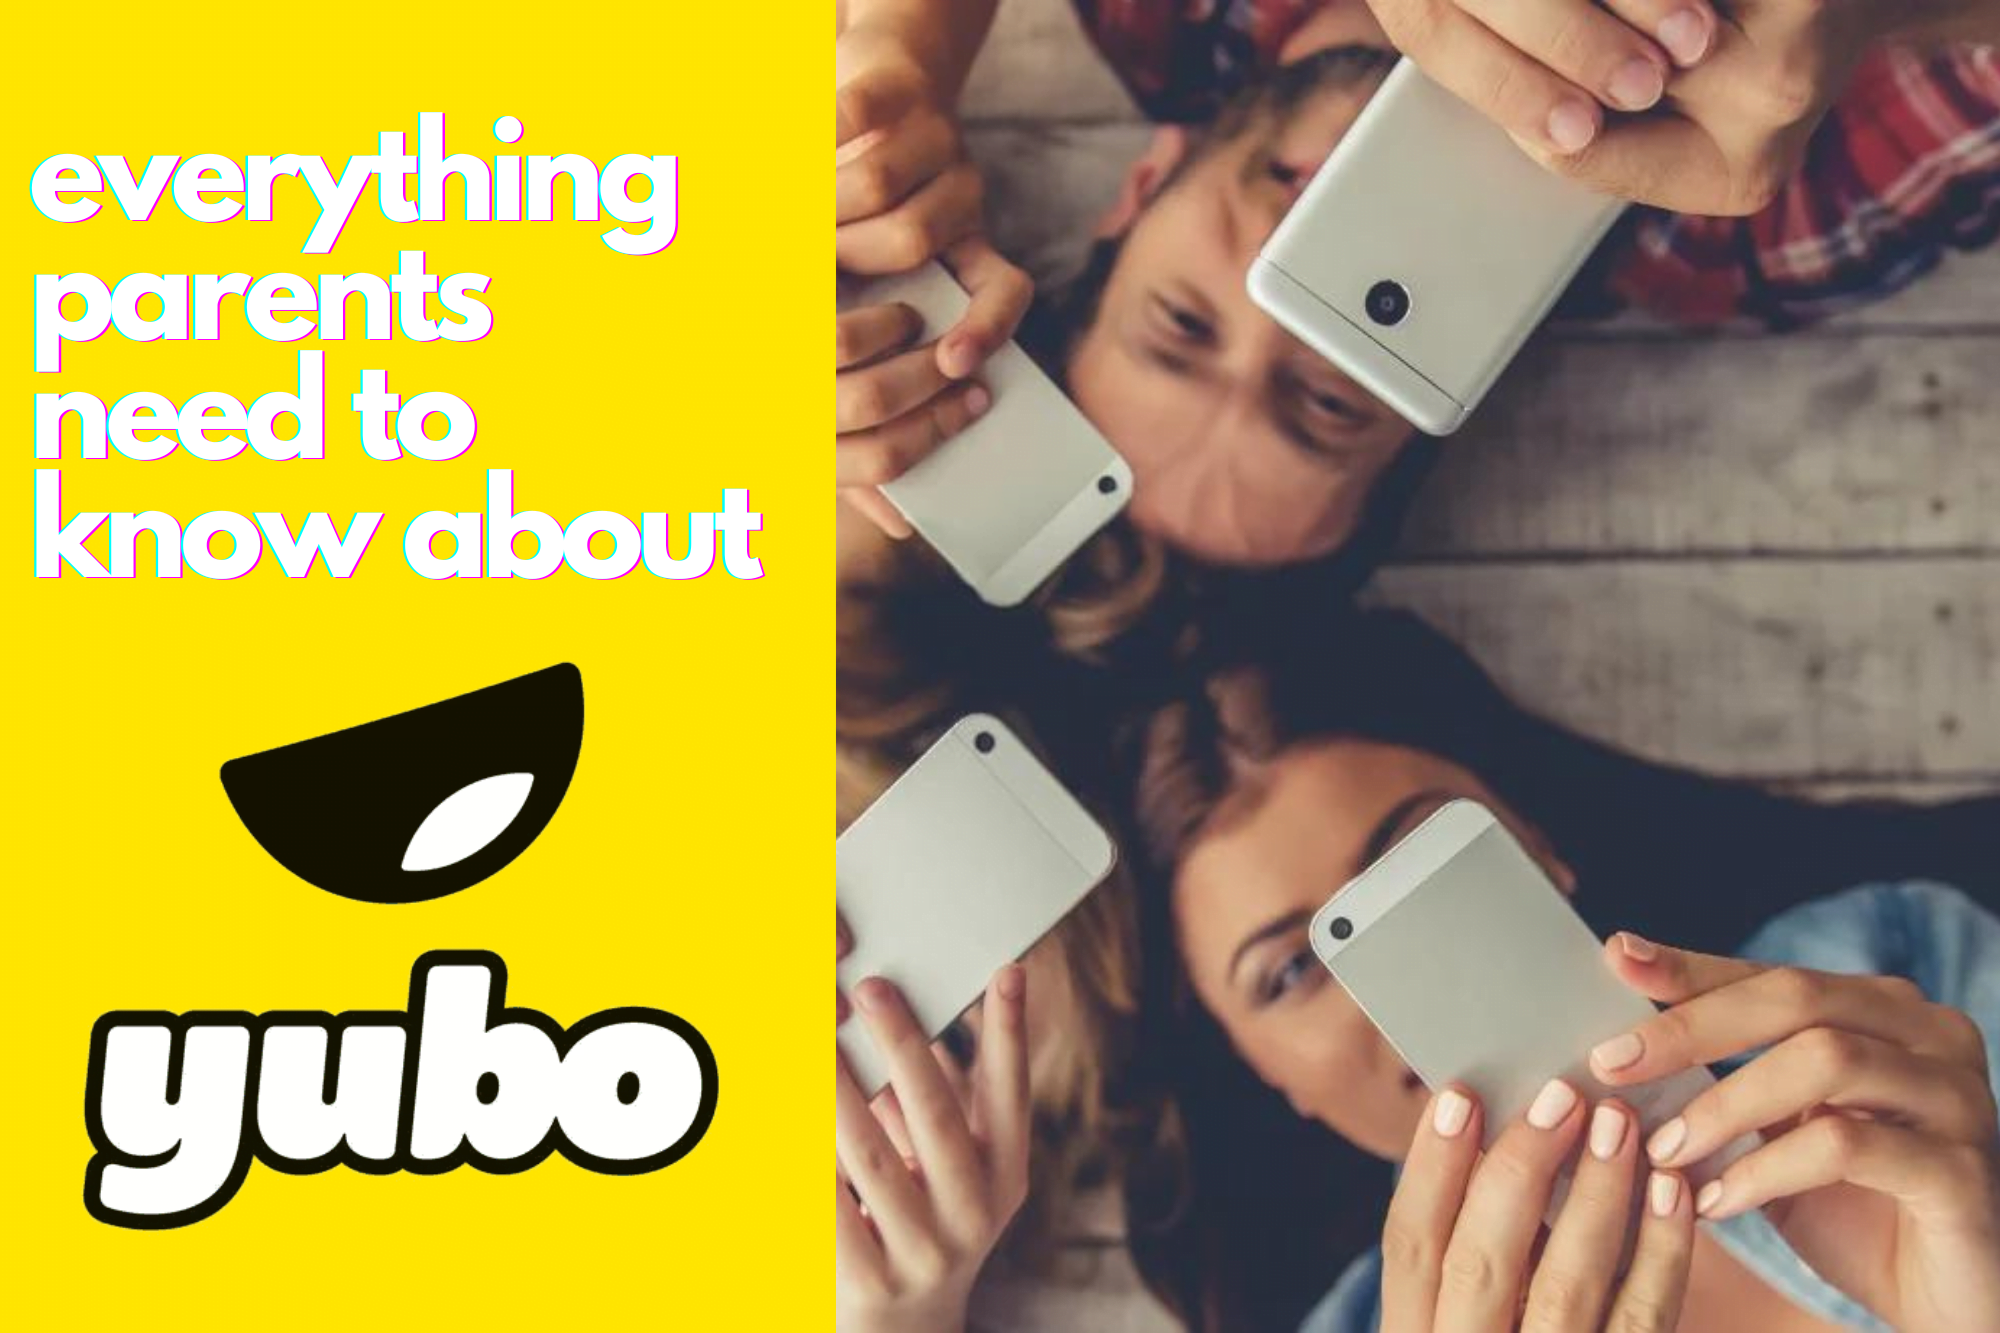 Everything Parents Need to Know About Yubo